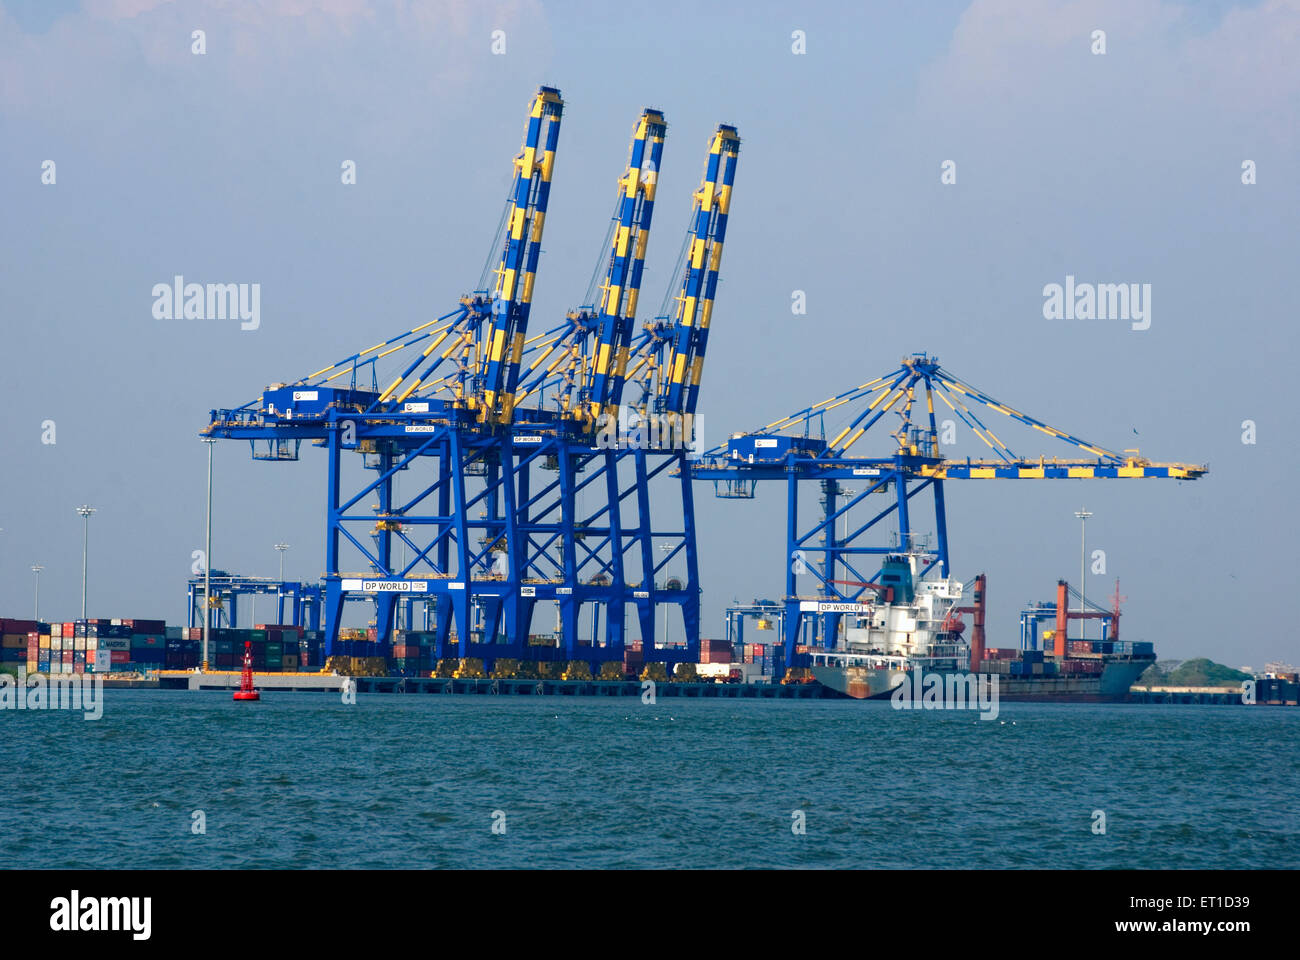 Big cranes for lifting cargo containers at port, Cochin ; Kerala ; India Stock Photo